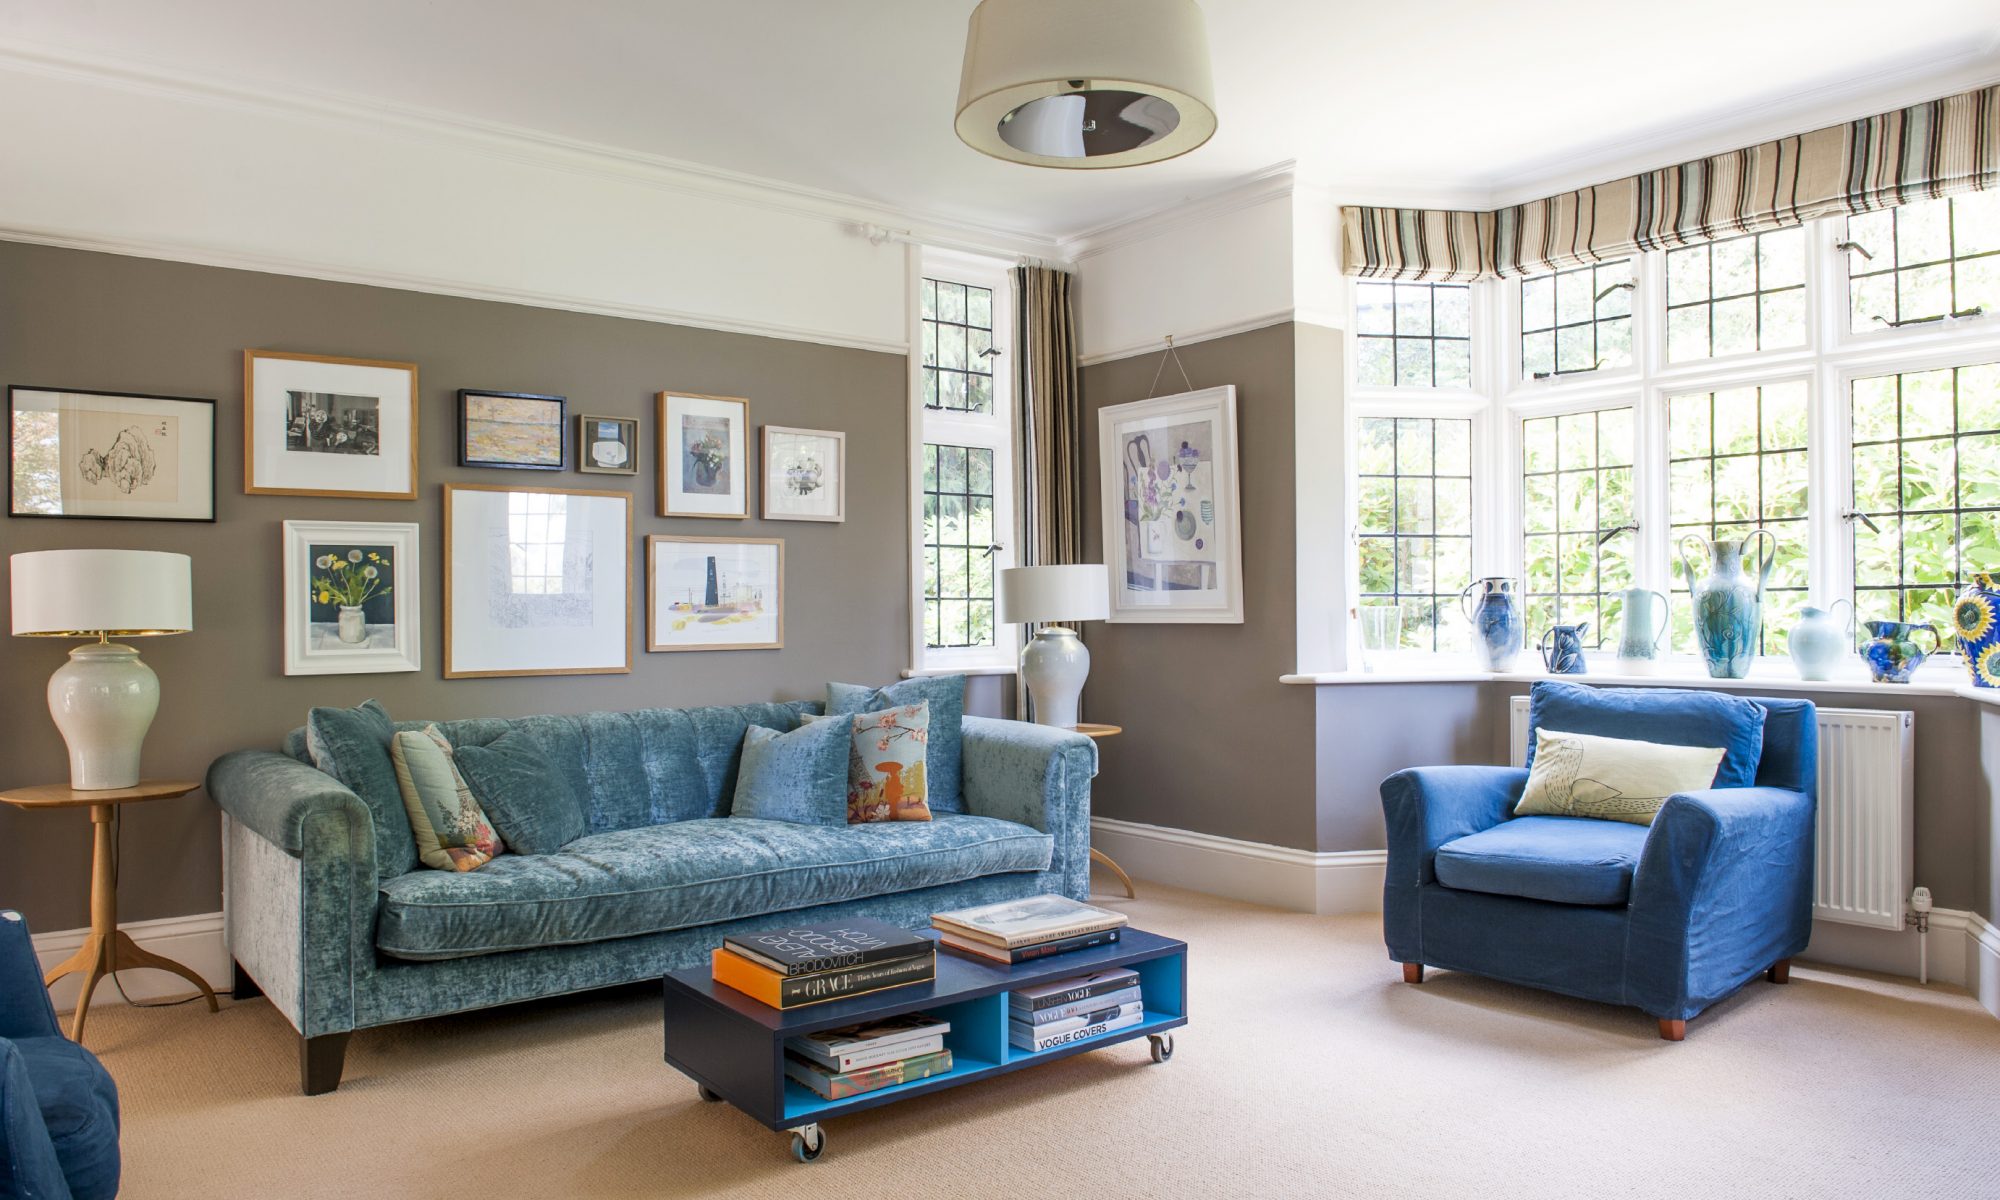 When Geoff and Annie Waring decided to leave the city in search of a greener way of living, they found that the challenge of renovating an Arts & Crafts house in Tunbridge Wells ticked all the boxes